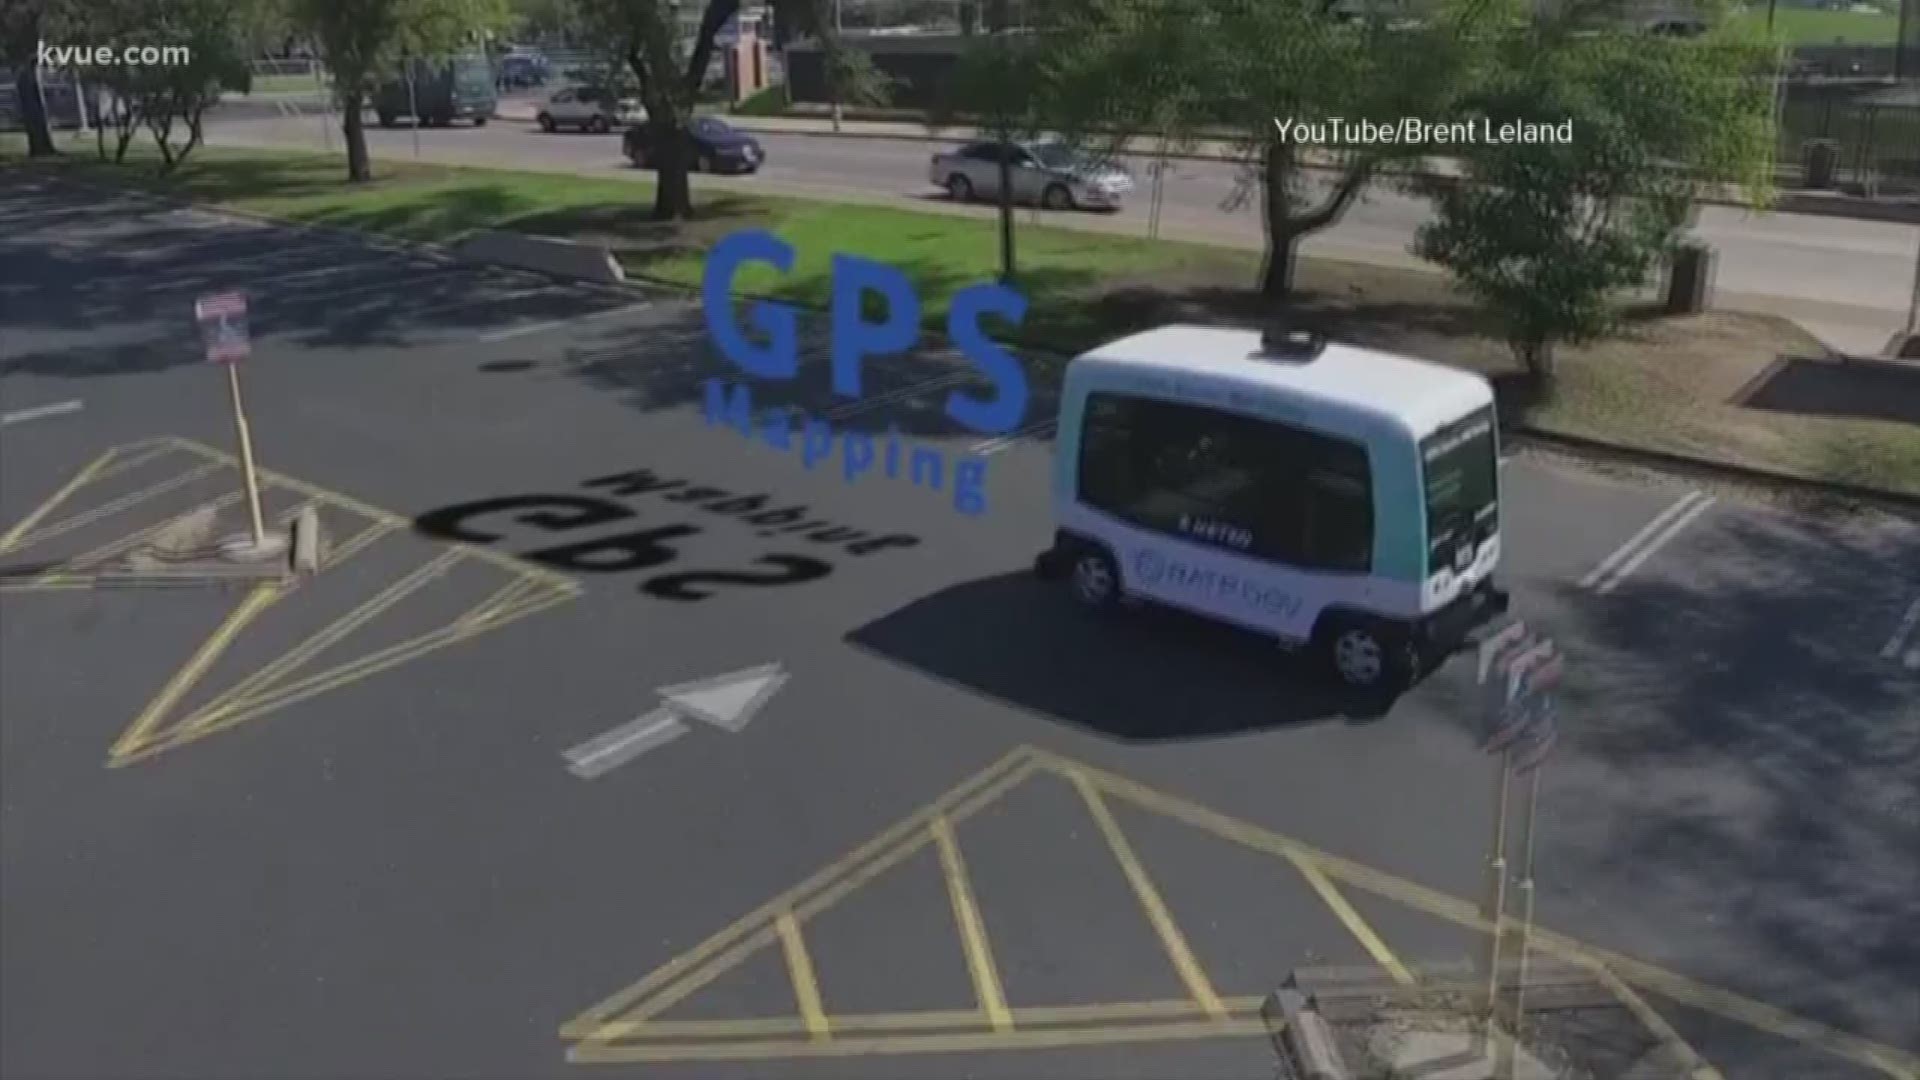 The transit service will start testing new driverless buses on Monday -- and they're hoping to have them picking people up by the fall.